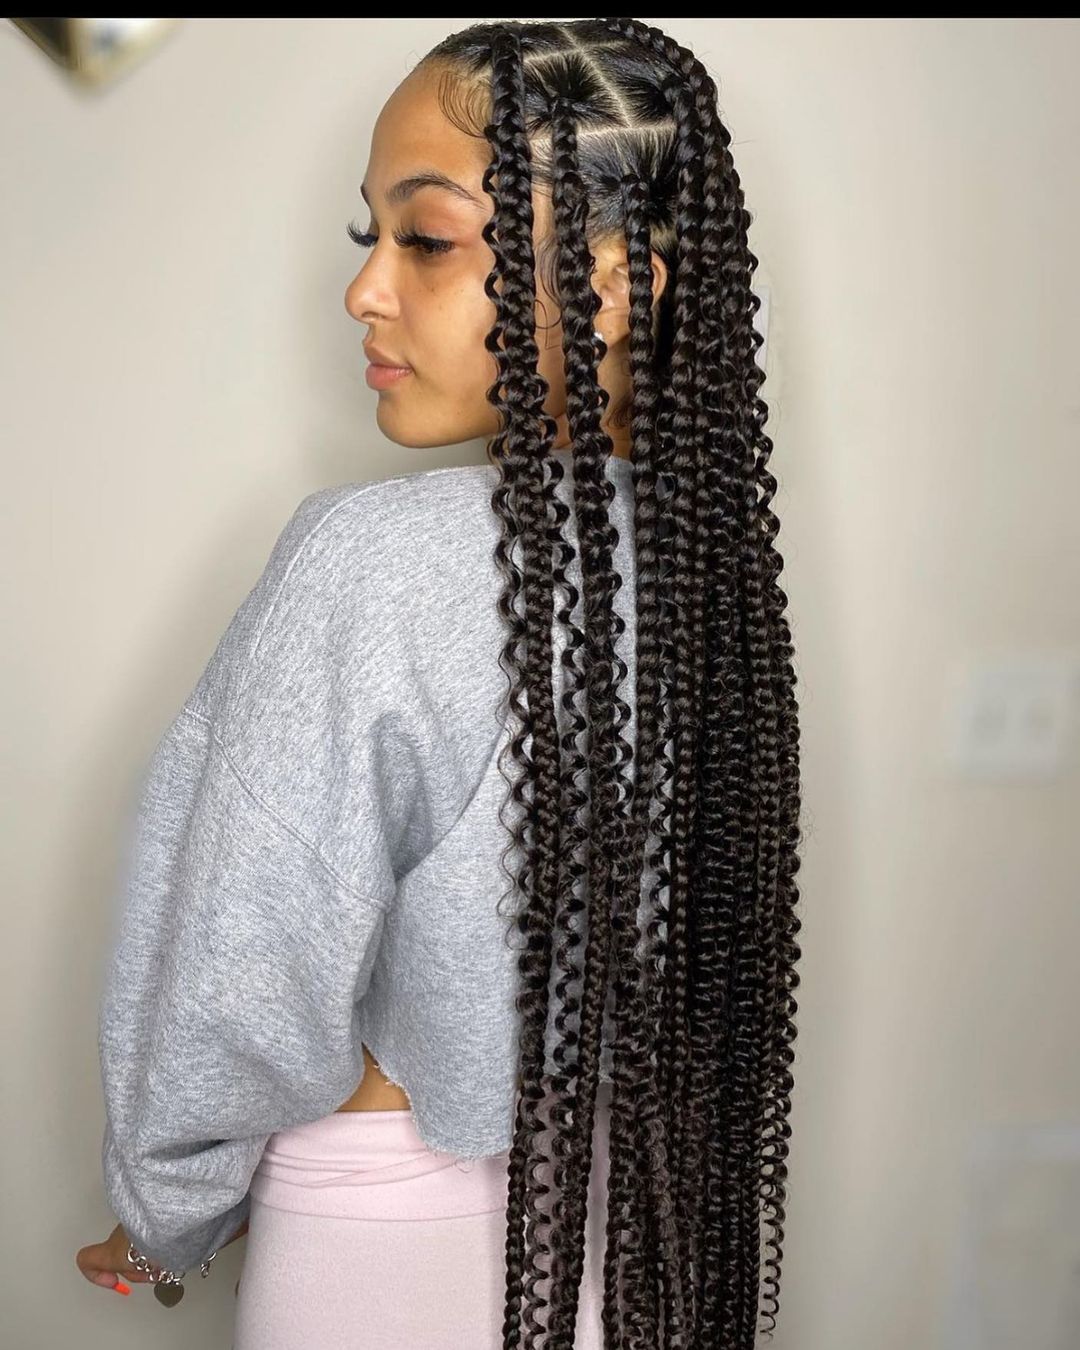 35 Knotless Box Braids That Will Inspire You to Experiment- Hairstylery ...